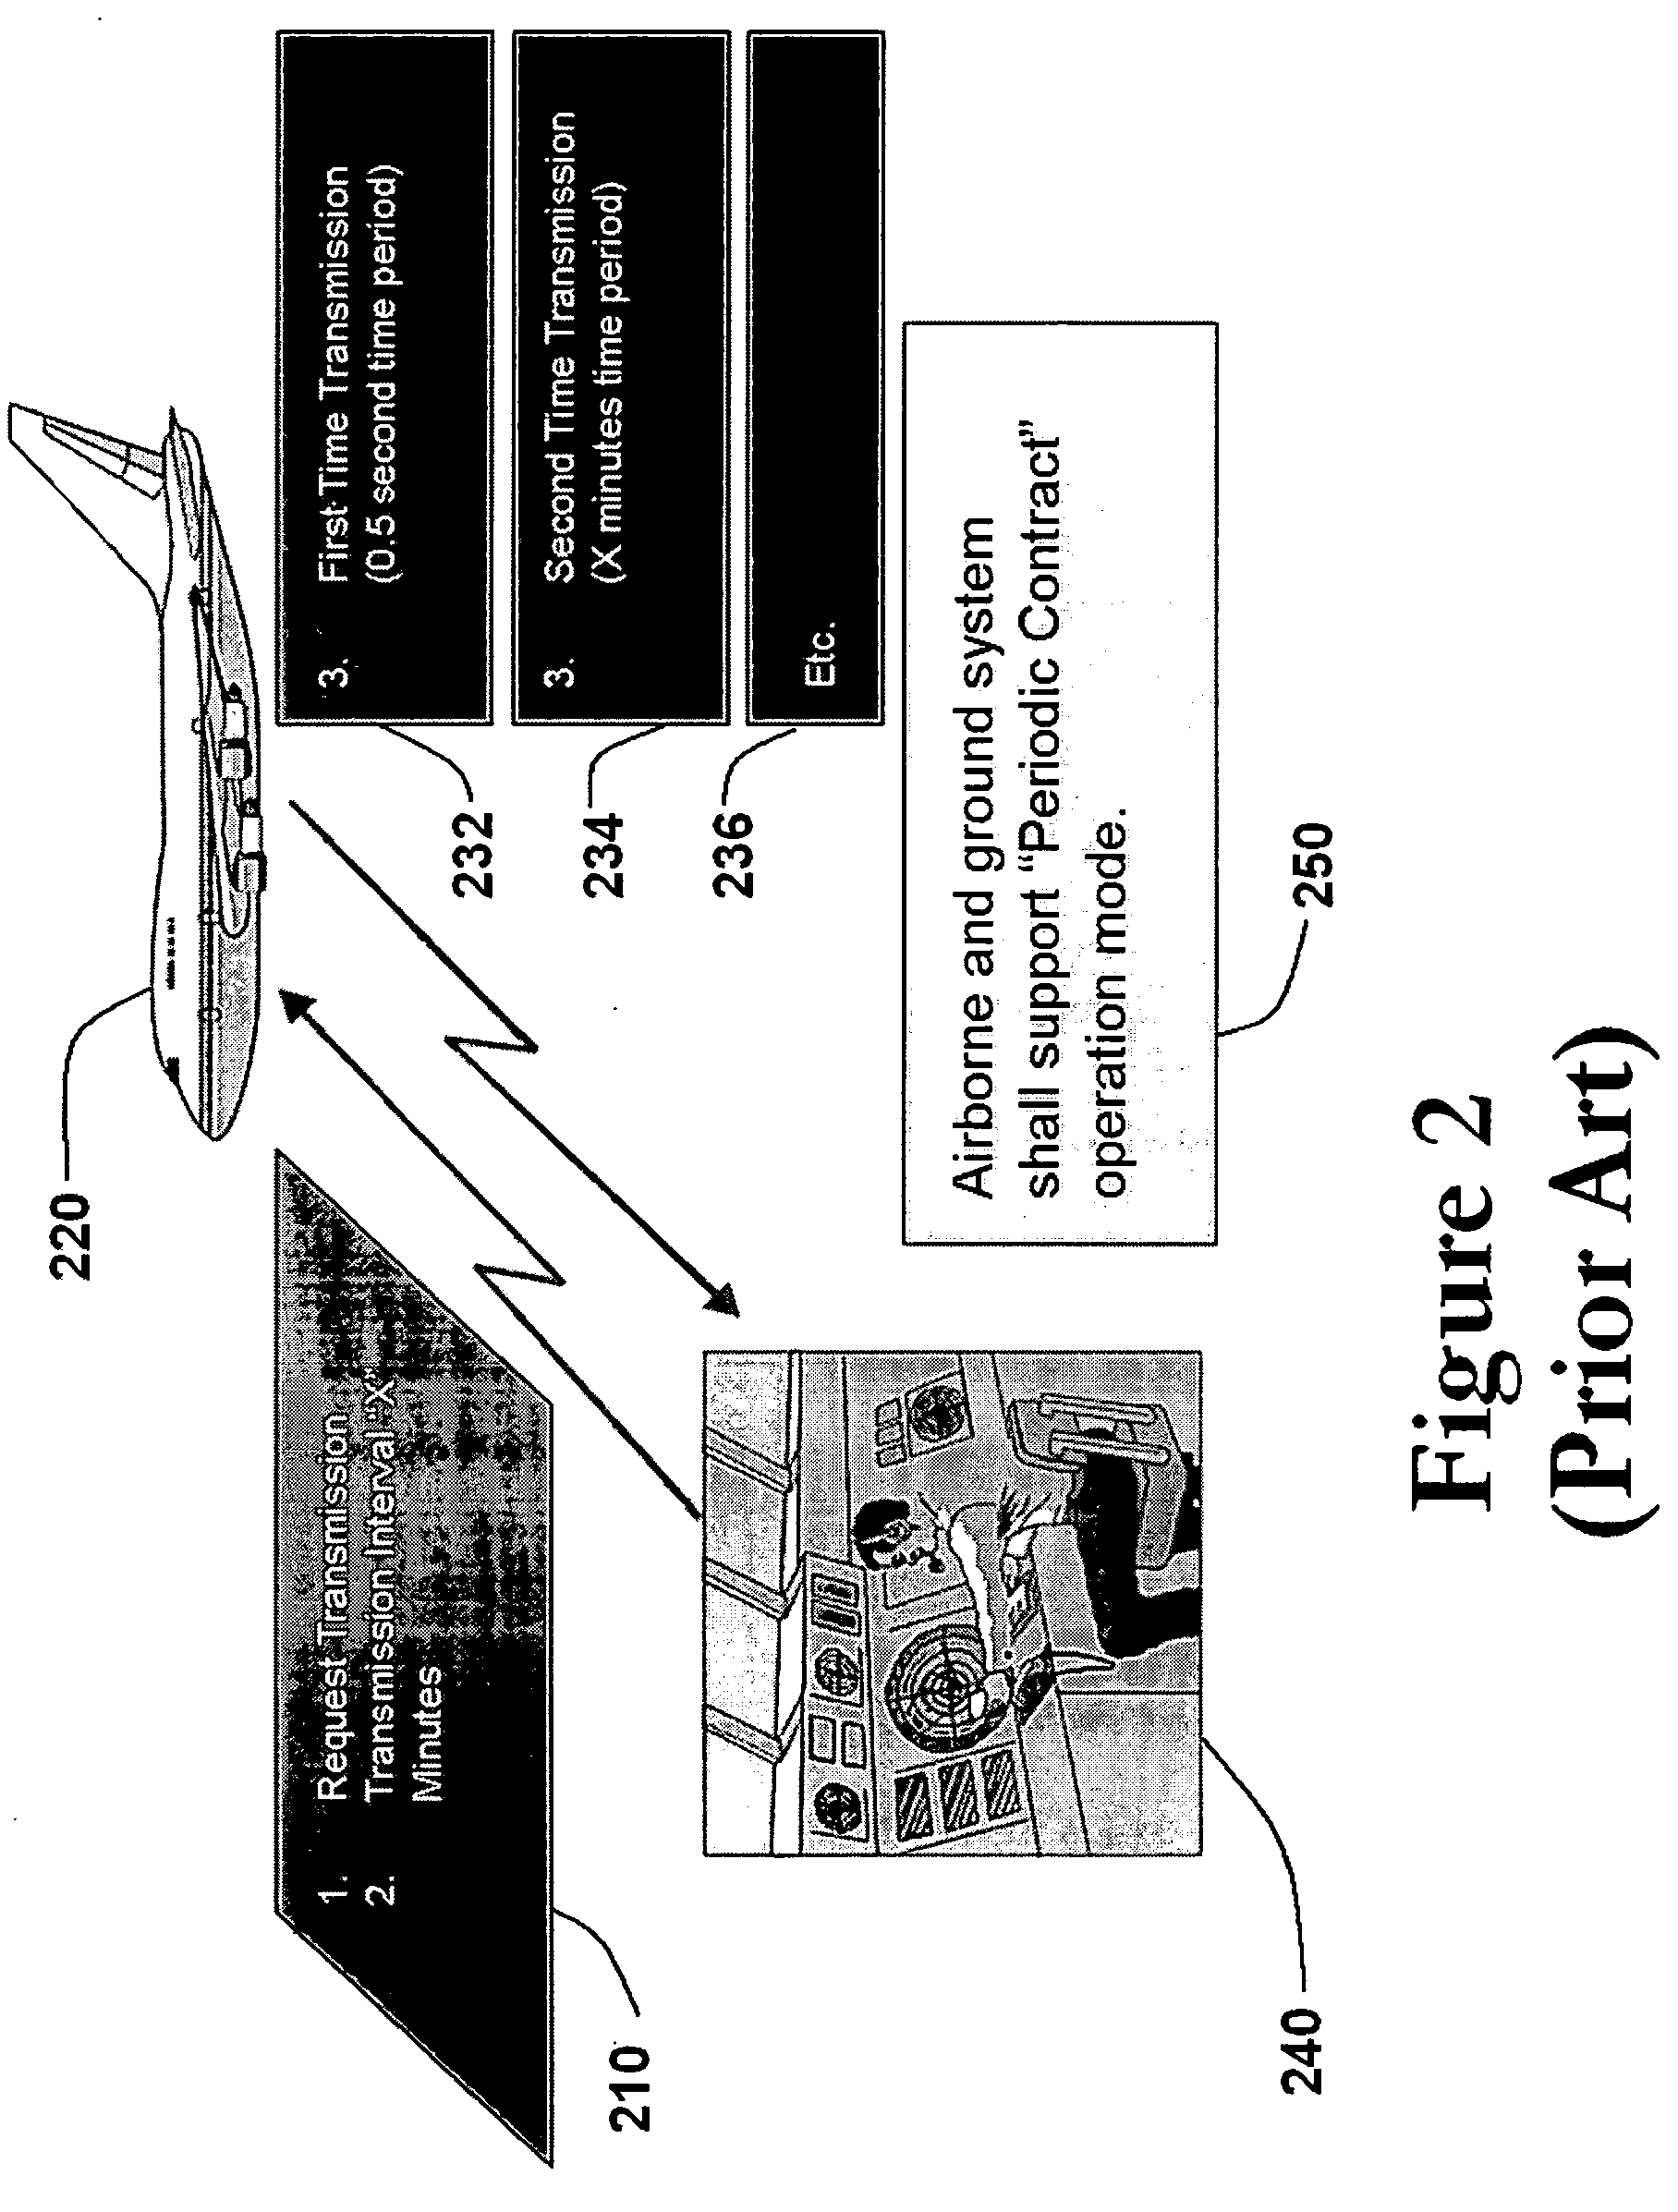 Method and apparatus to improve ADS-B security